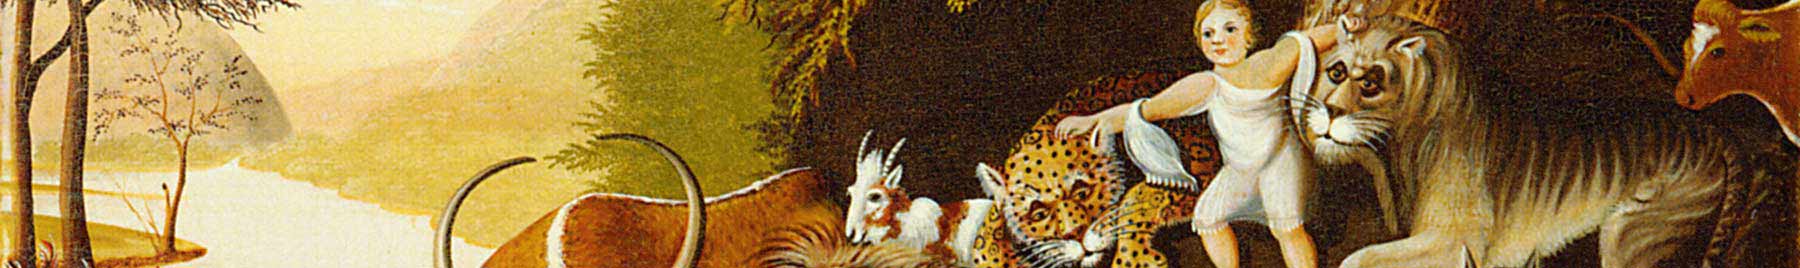 Detail of The Peaceable Kingdom by Edward Hicks